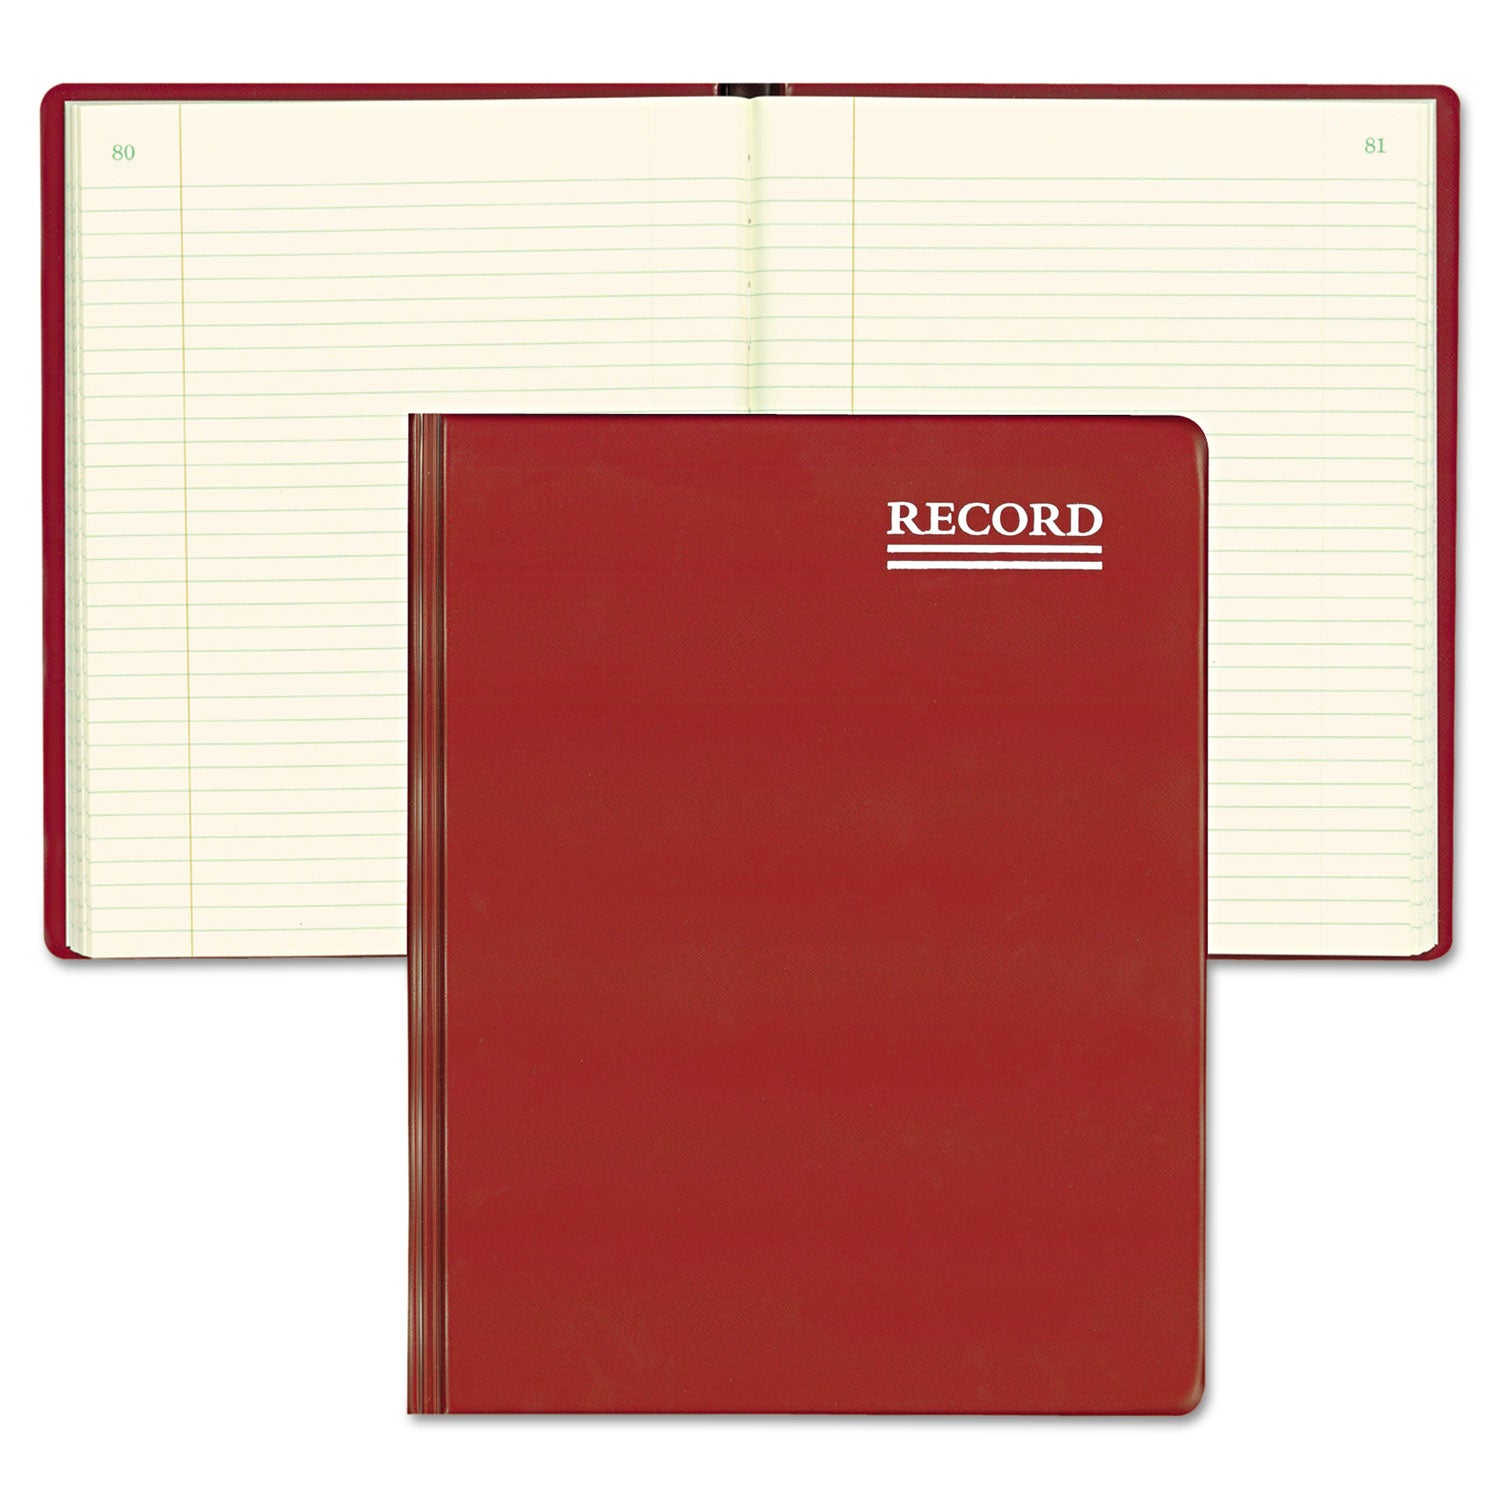 national-brand-red-vinyl-series-journal-1-subject-medium-college-rule-red-cover-300-10-x-775-sheets_red57231 - 2